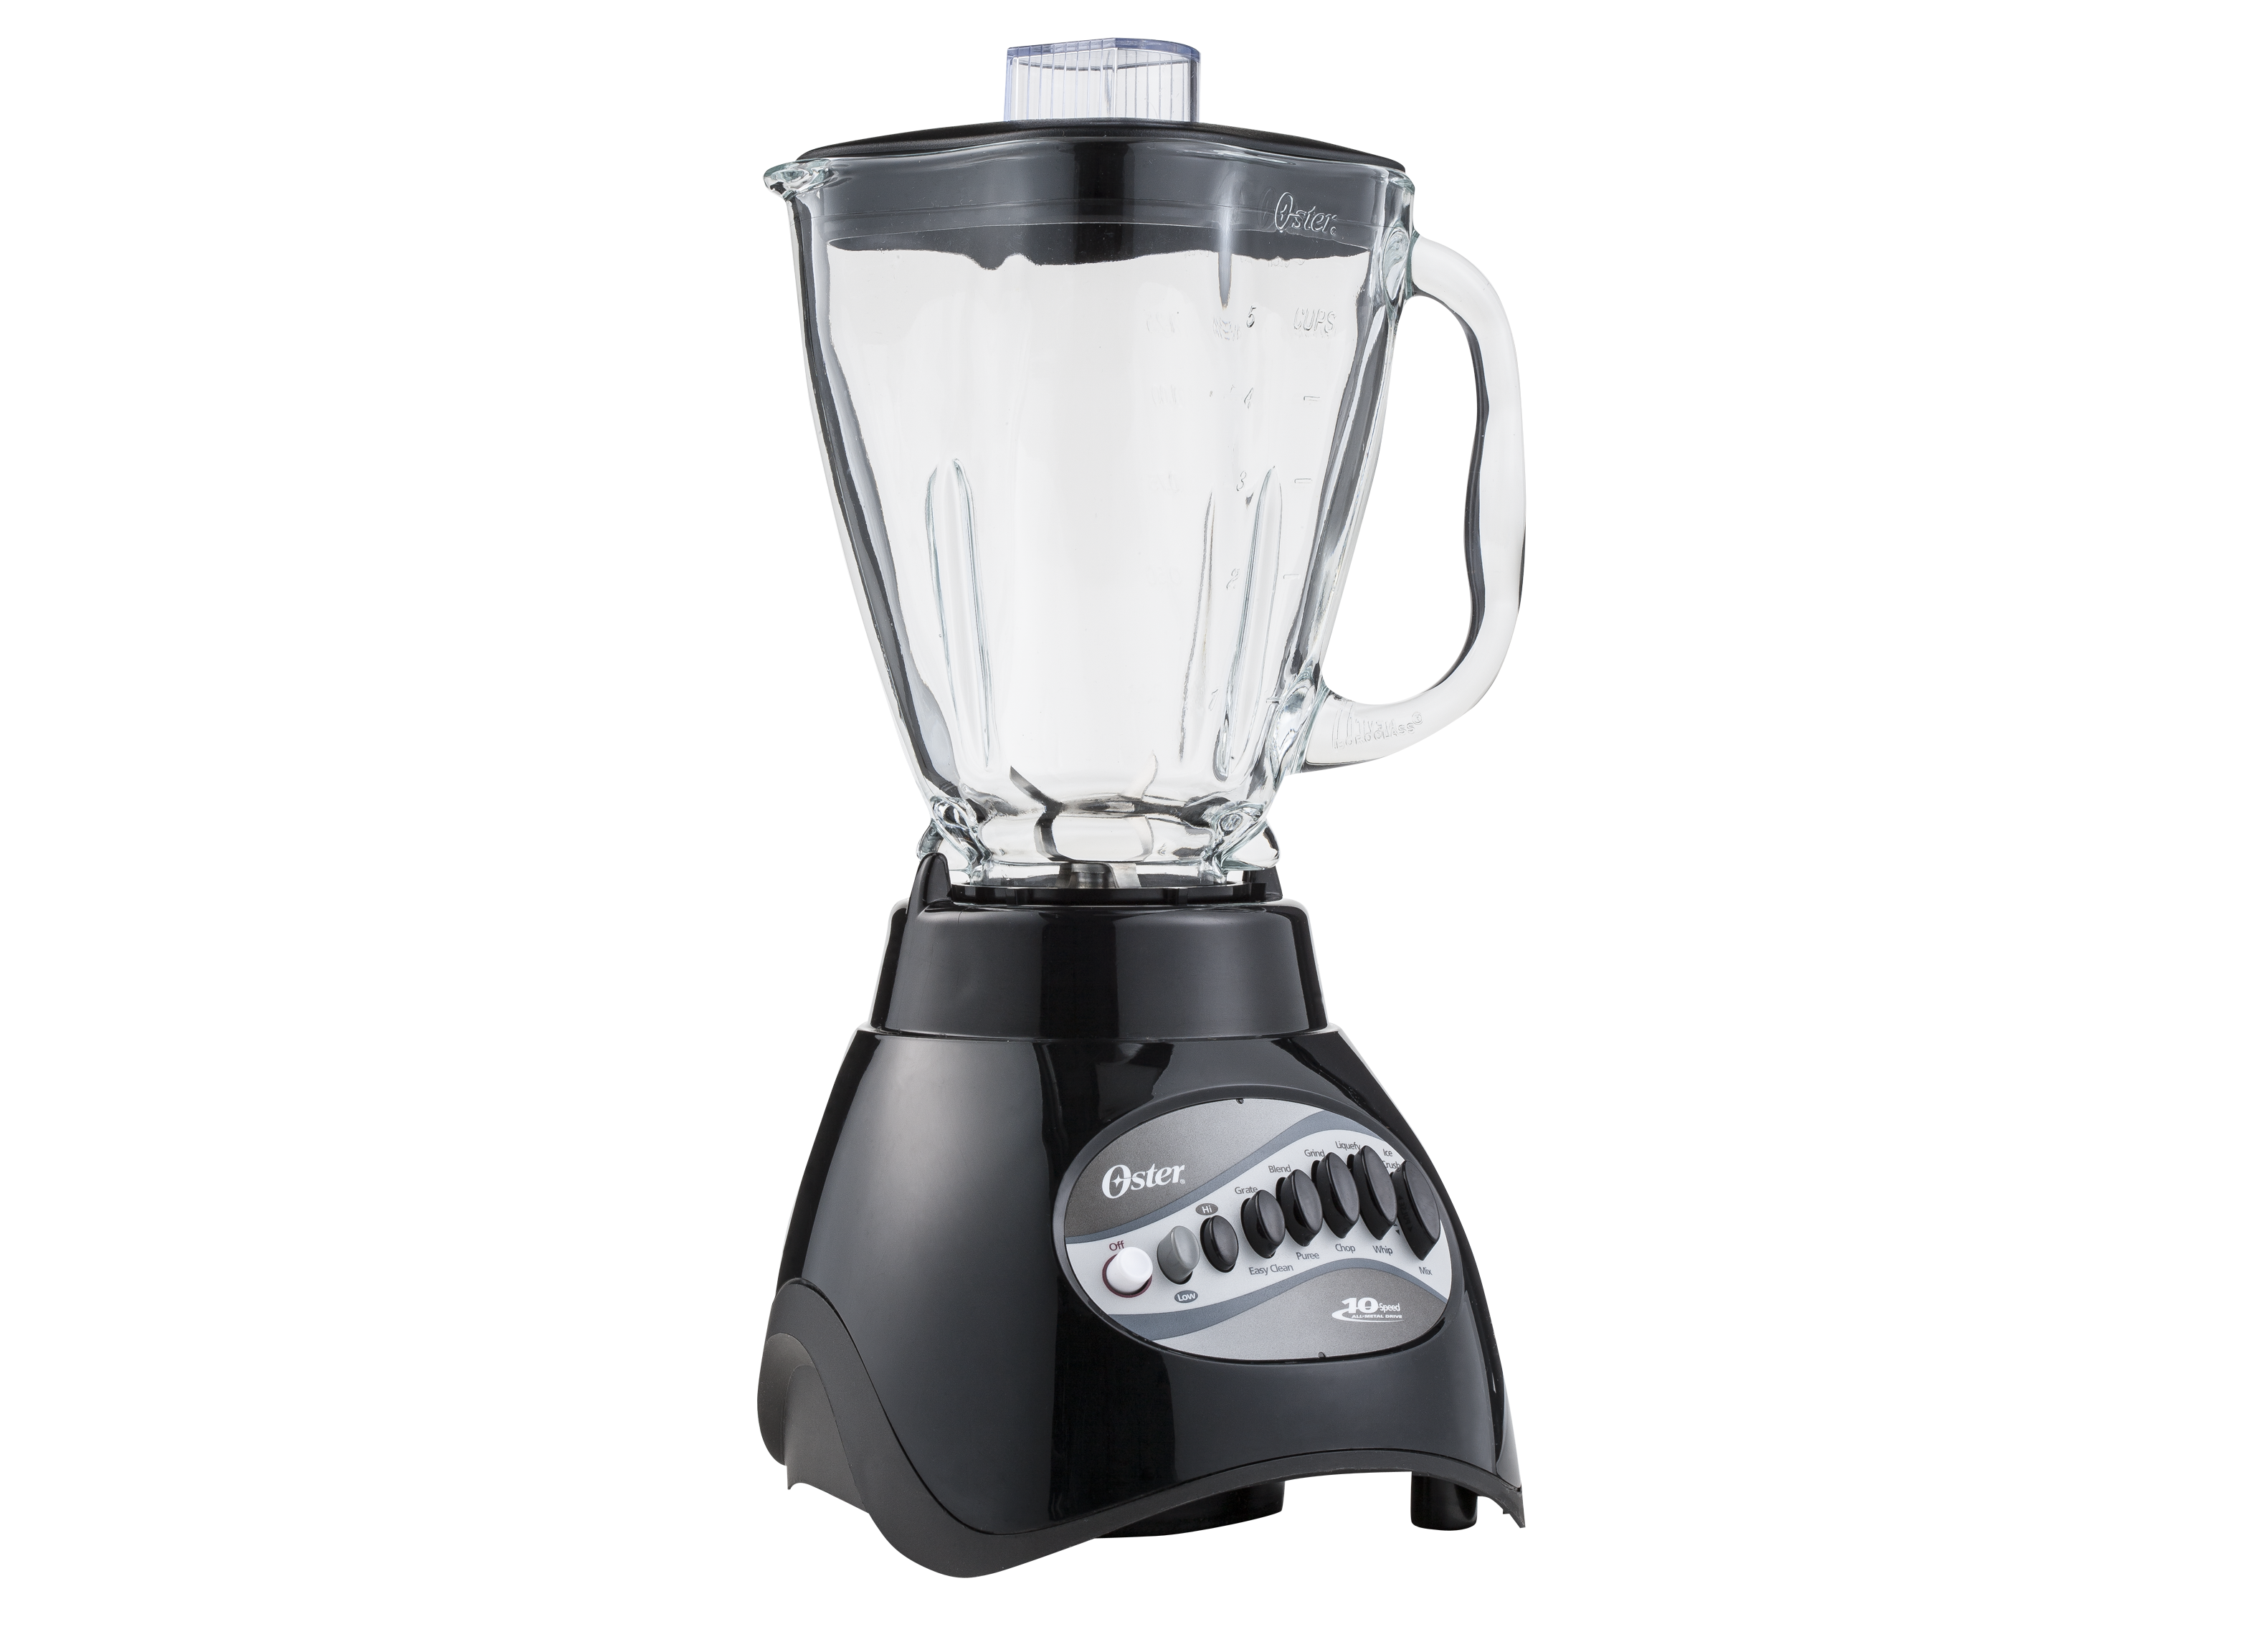 https://crdms.images.consumerreports.org/prod/products/cr/models/290172-blenders-oster-10speed6832.png